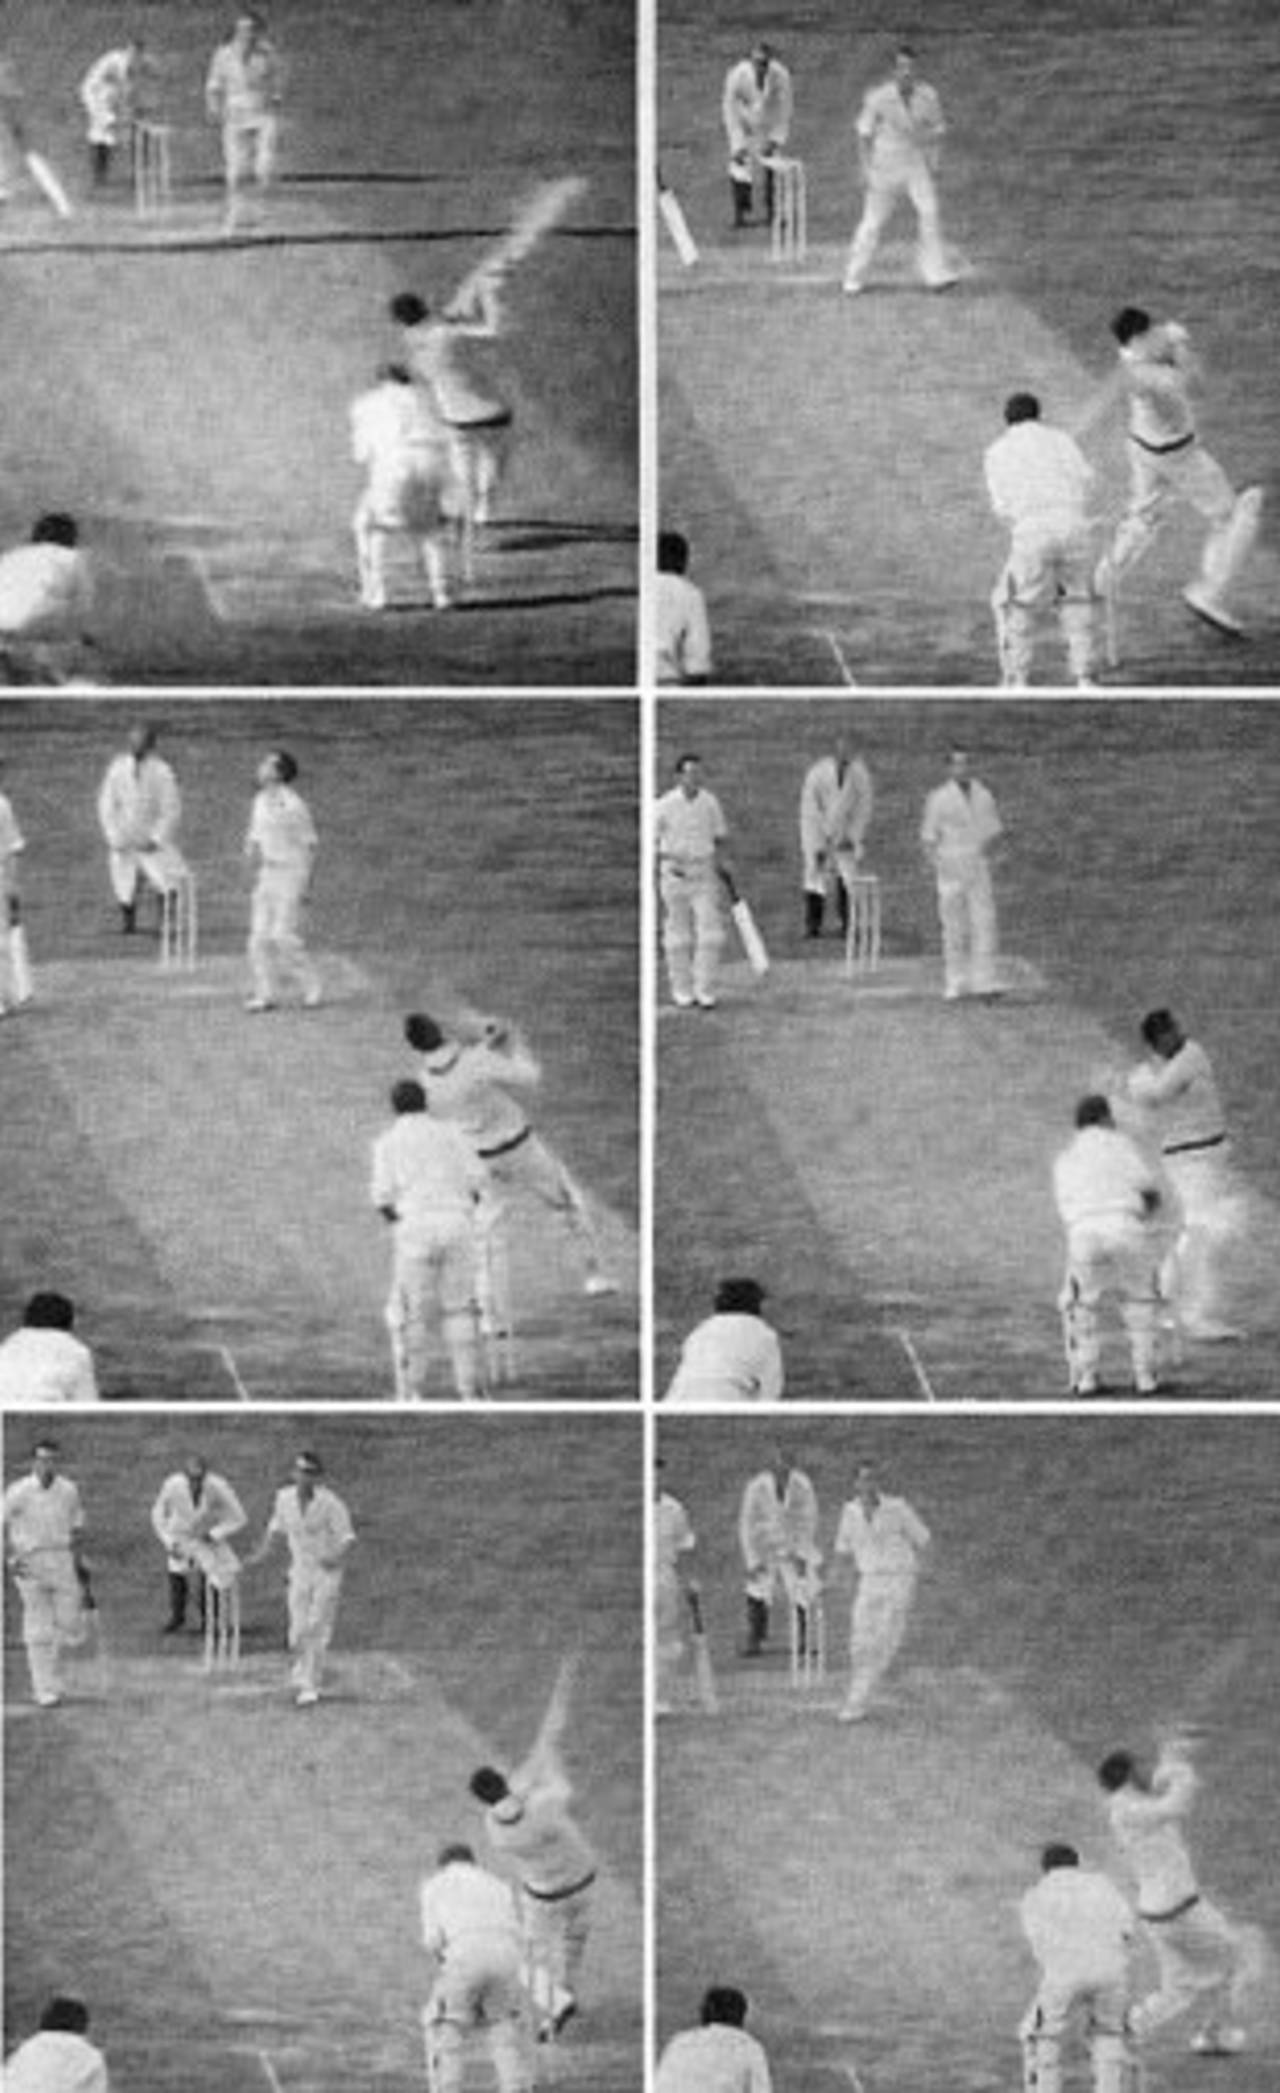 A collage of Garry Sobers smashing six sixes off an over from Malcolm Nash, Glamorgan v Nottinghamshire, Cardiff, August 31, 1968